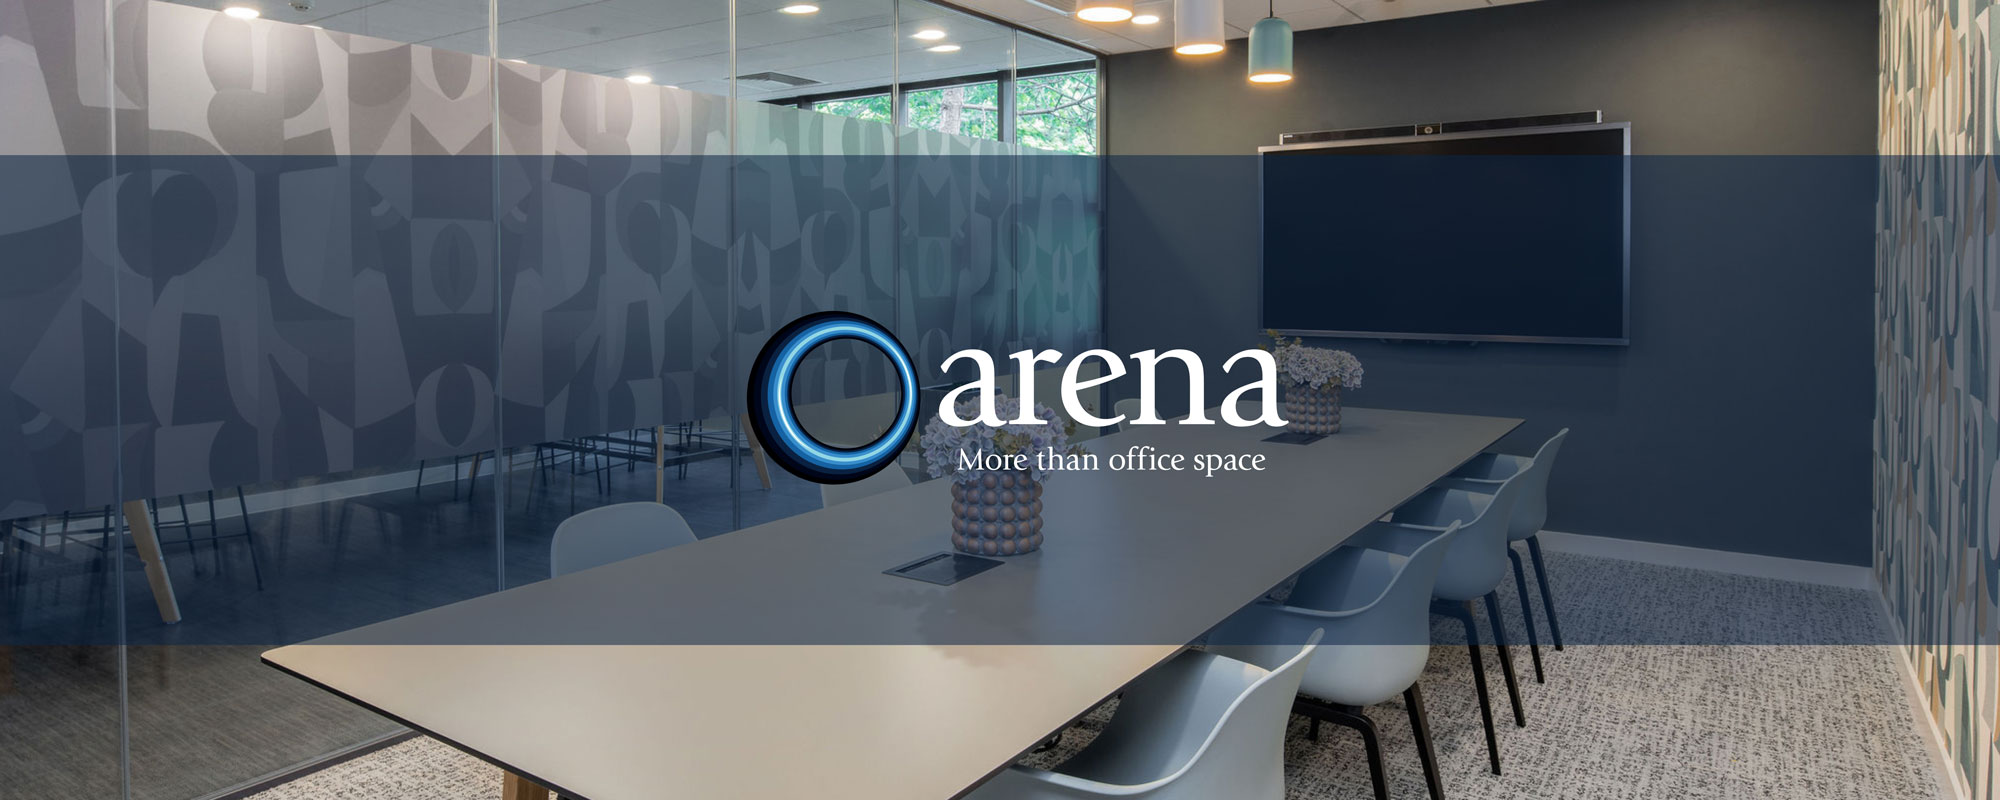 Arena more than office space